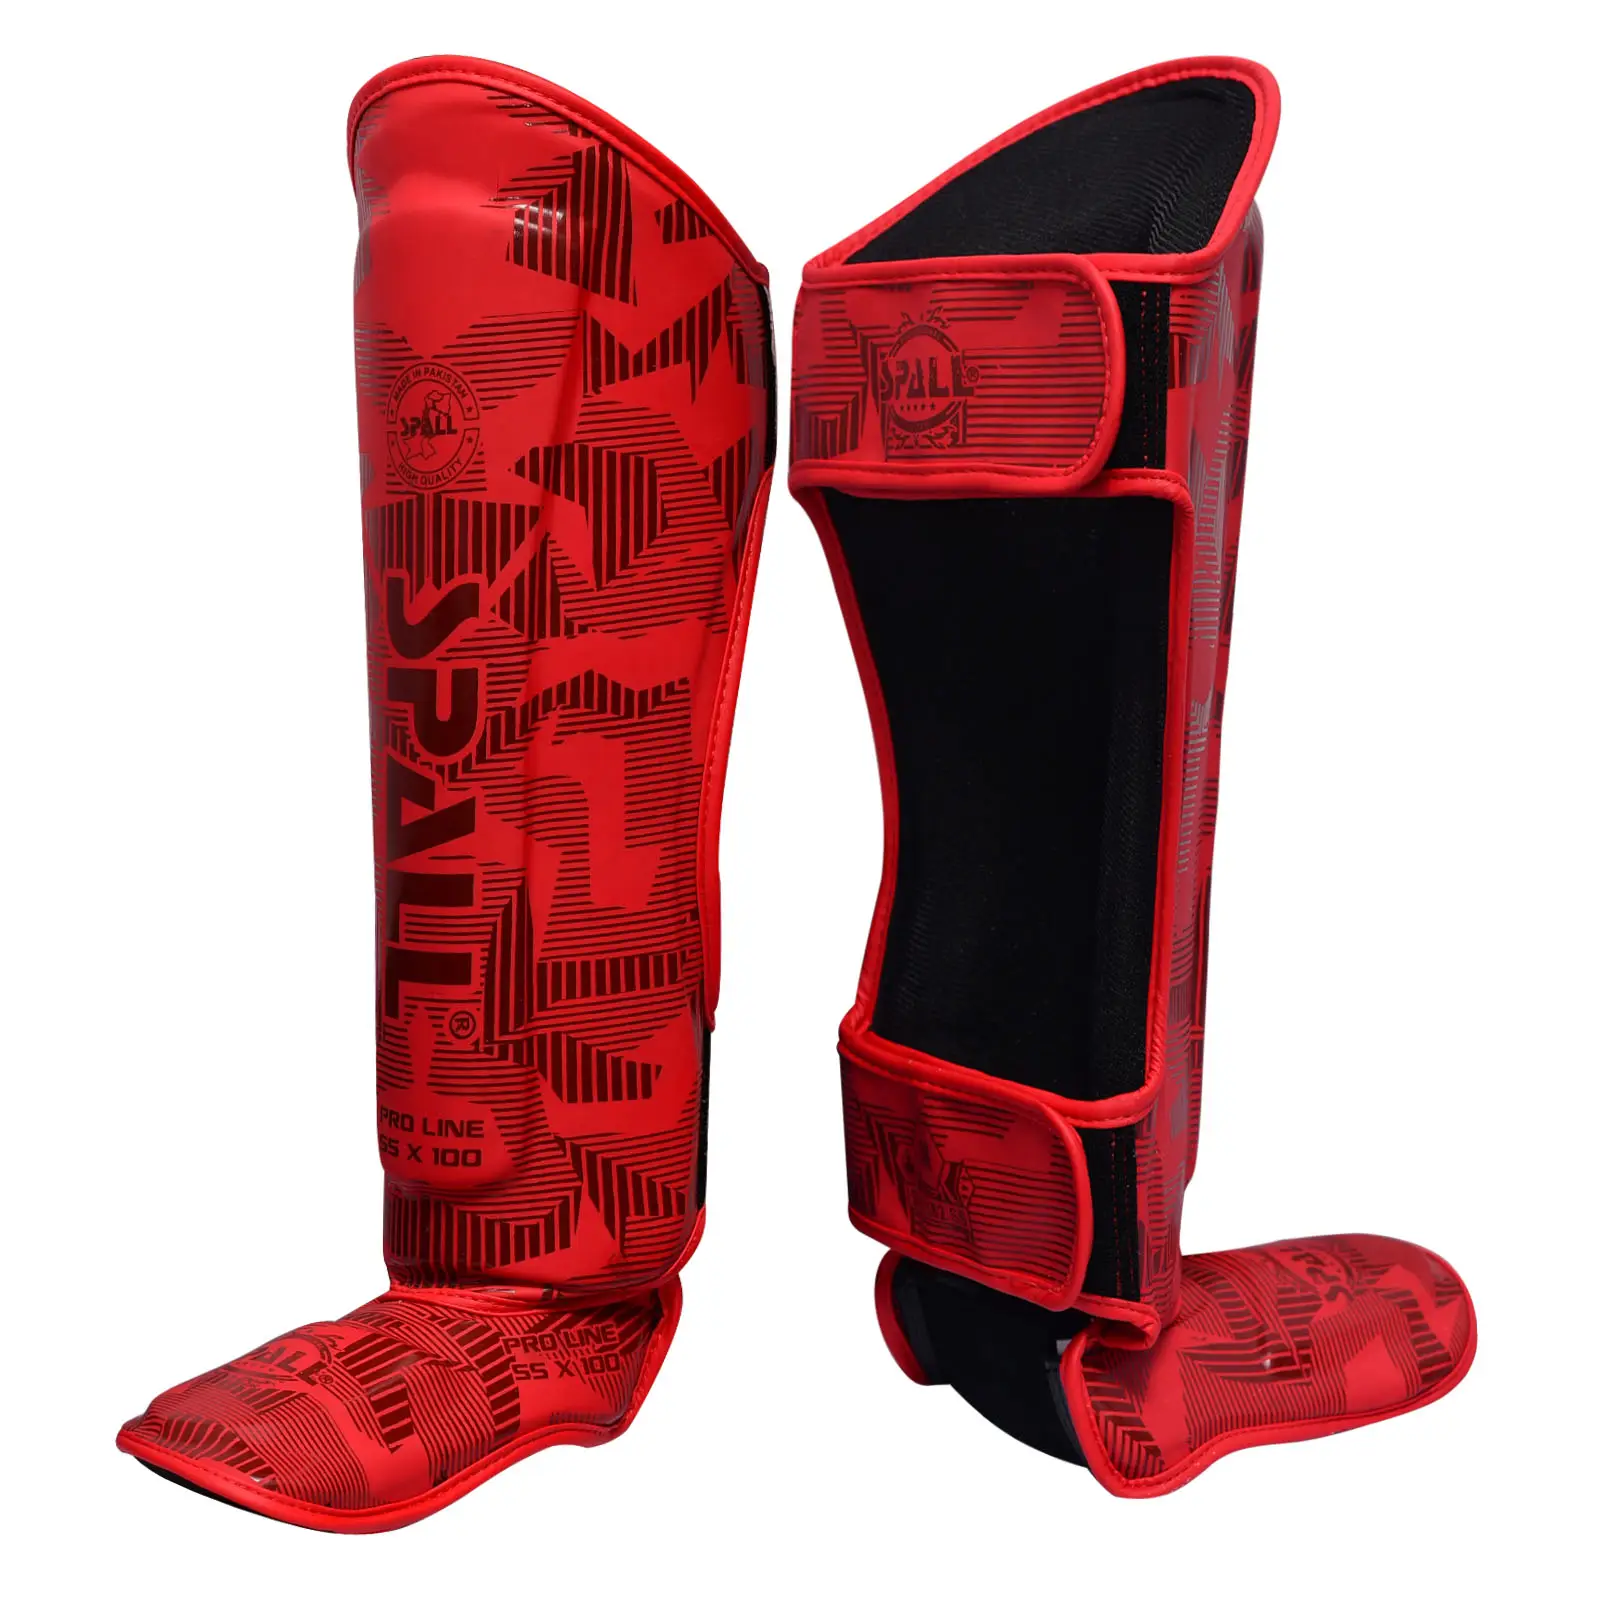 Shin Guard shin Instep Pads for BJJ Karate Sparring Kickboxing Martial Art MMA Boxing shin step Training Equipment Gear By SPALL